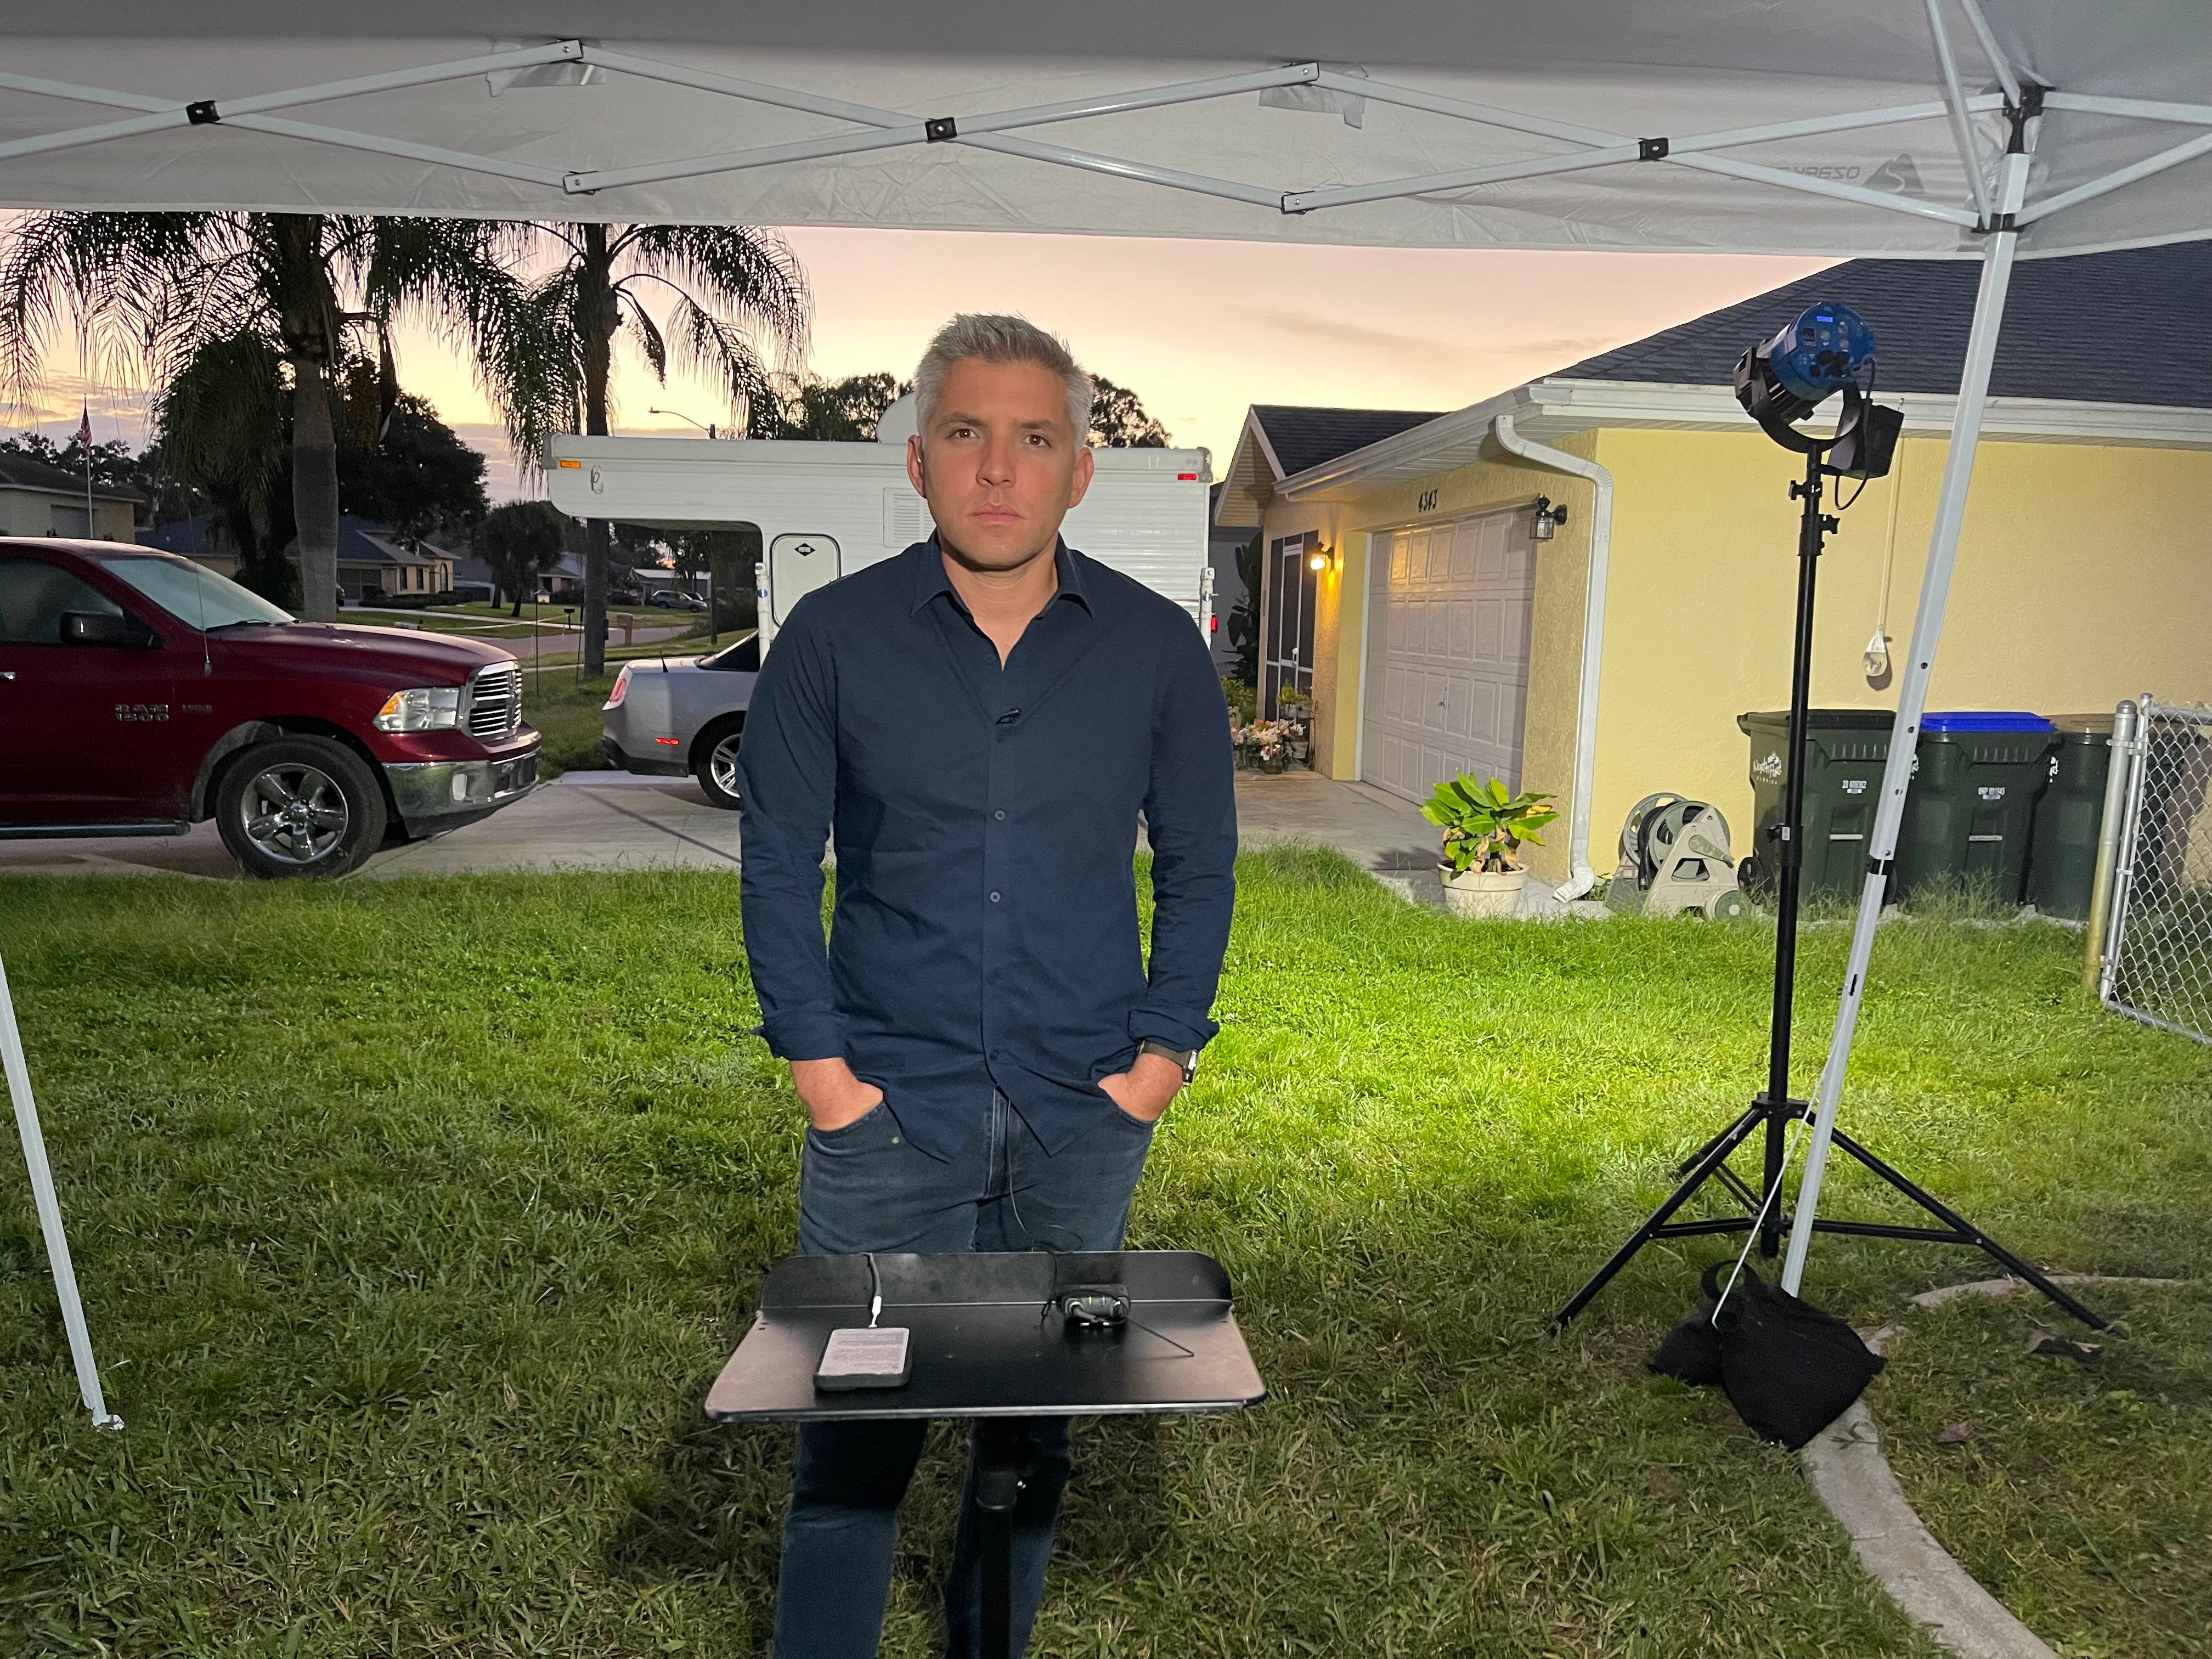 Brian Entin spent weeks reporting from the Laundrie home in North Port, Florida